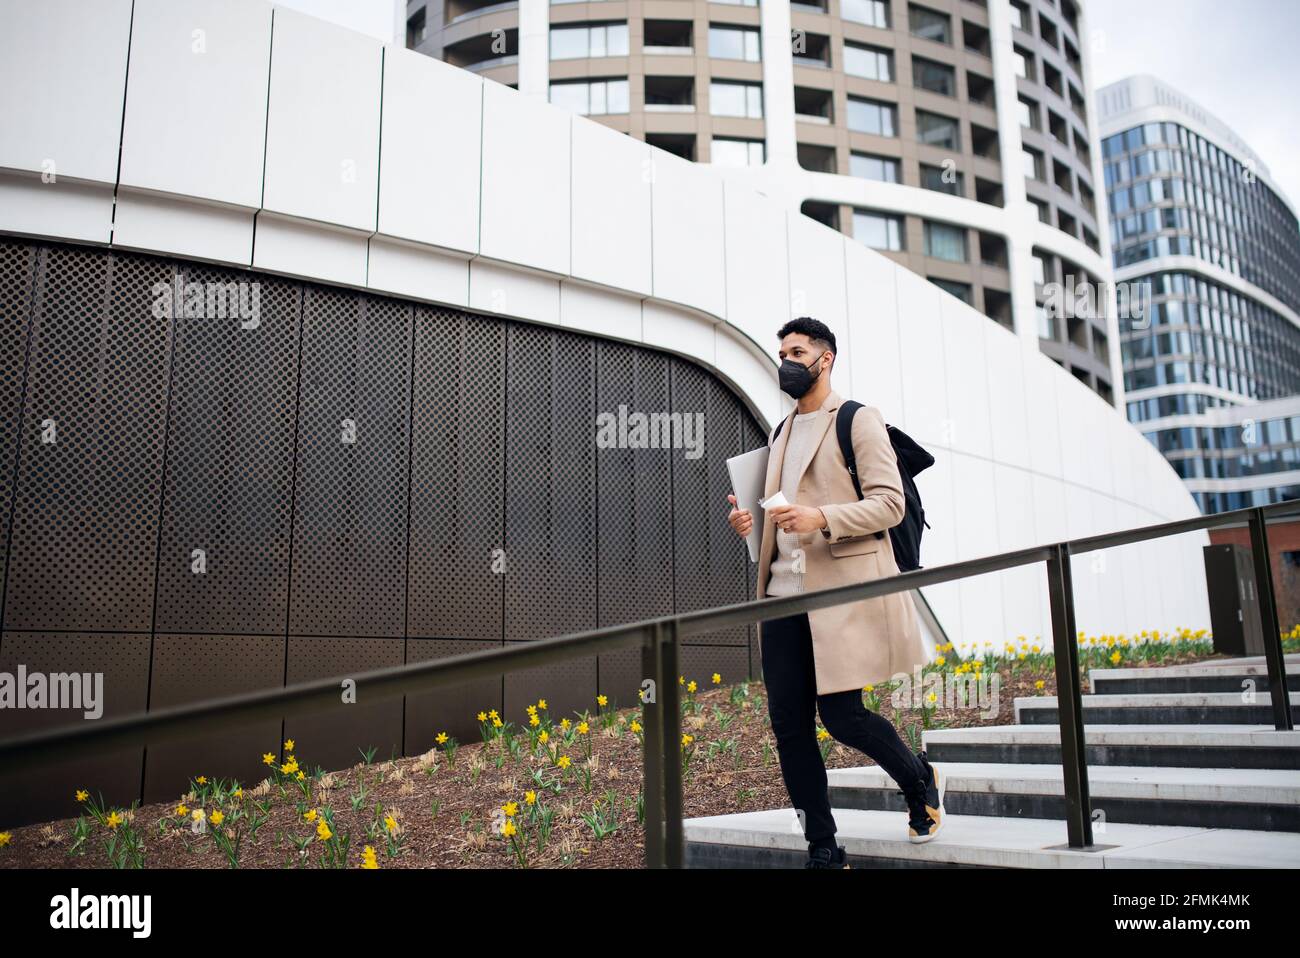 Happy man with laptop on the way to work outdoors in city, coronavirus concept. Stock Photo